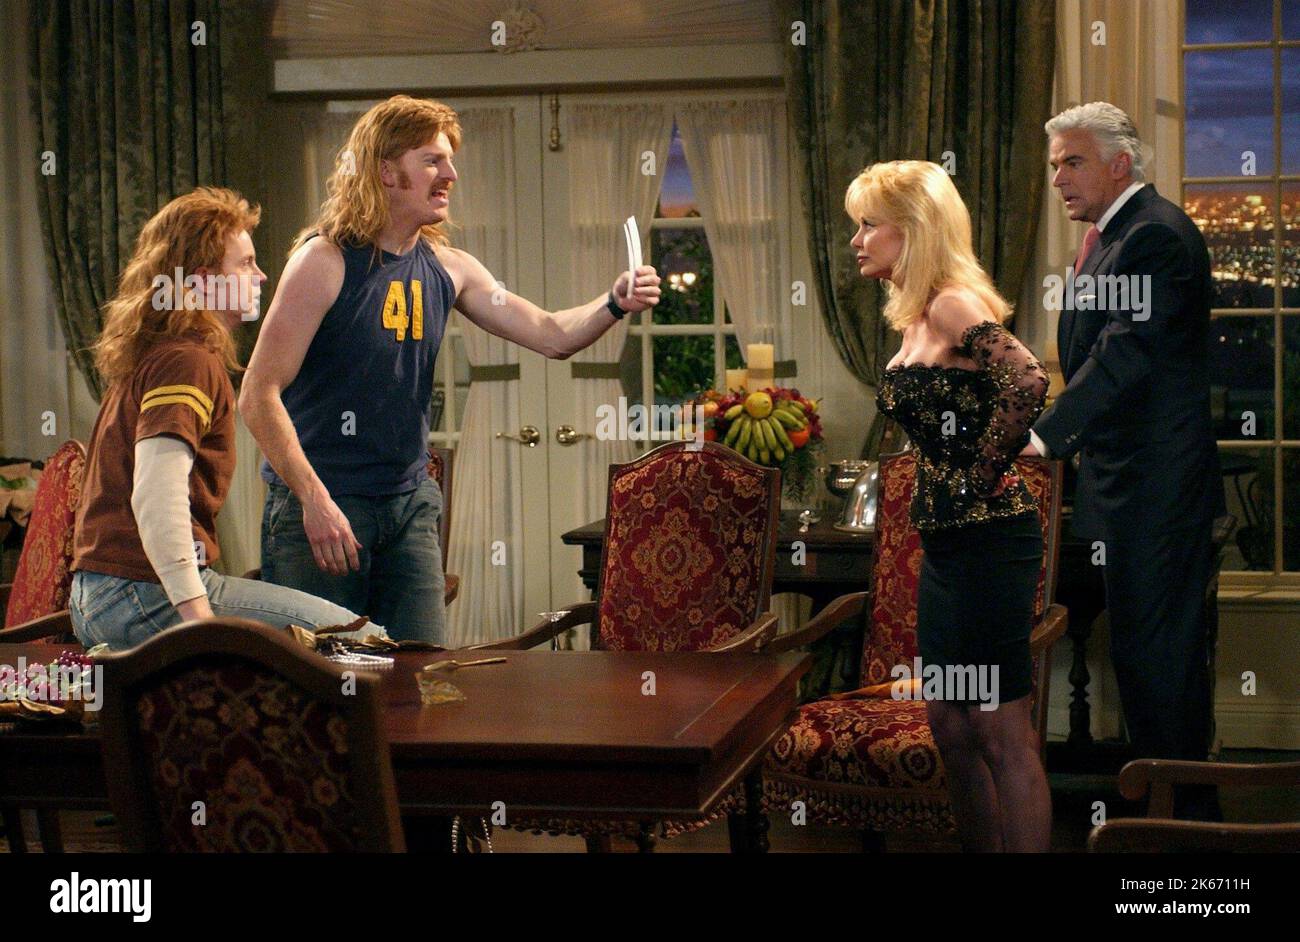 DAVID HORNSBY, MICHAEL WEAVER, LONI ANDERSON, JOHN O'HURLEY, THE MULLETS, 2003 Stock Photo